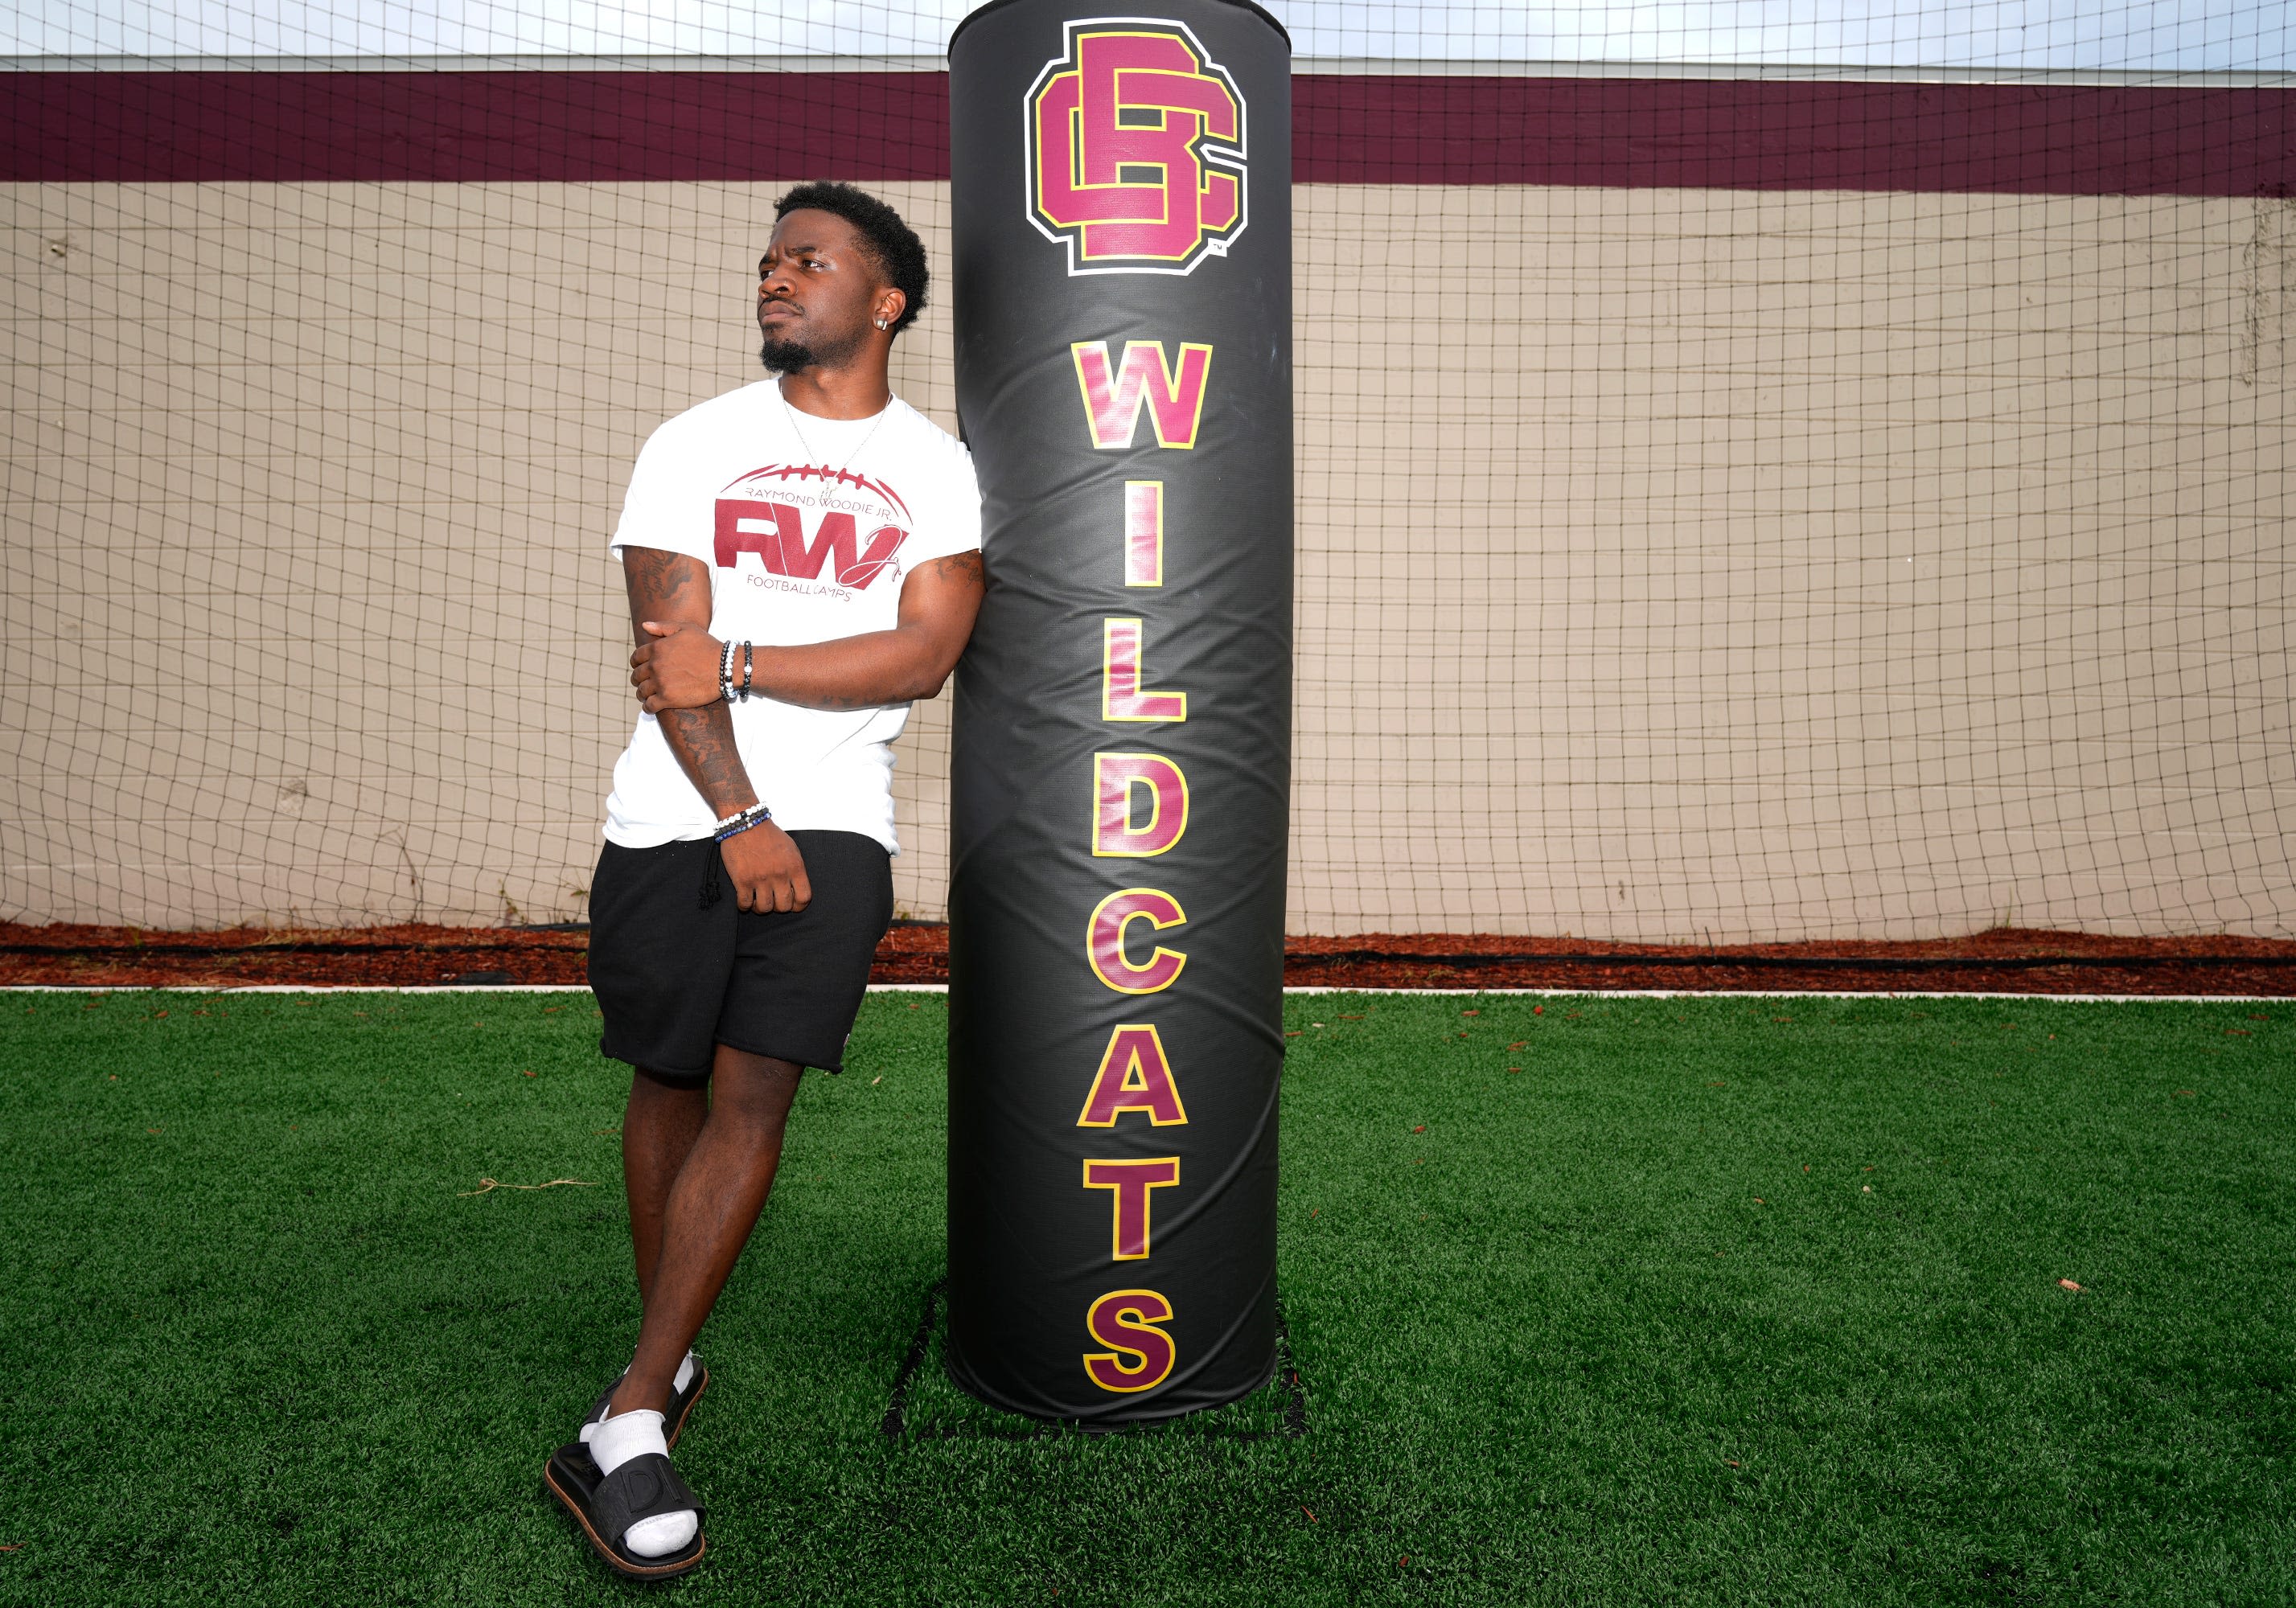 Cross Patton, William Roberts III, sons of famous rappers, connect with Bethune-Cookman football